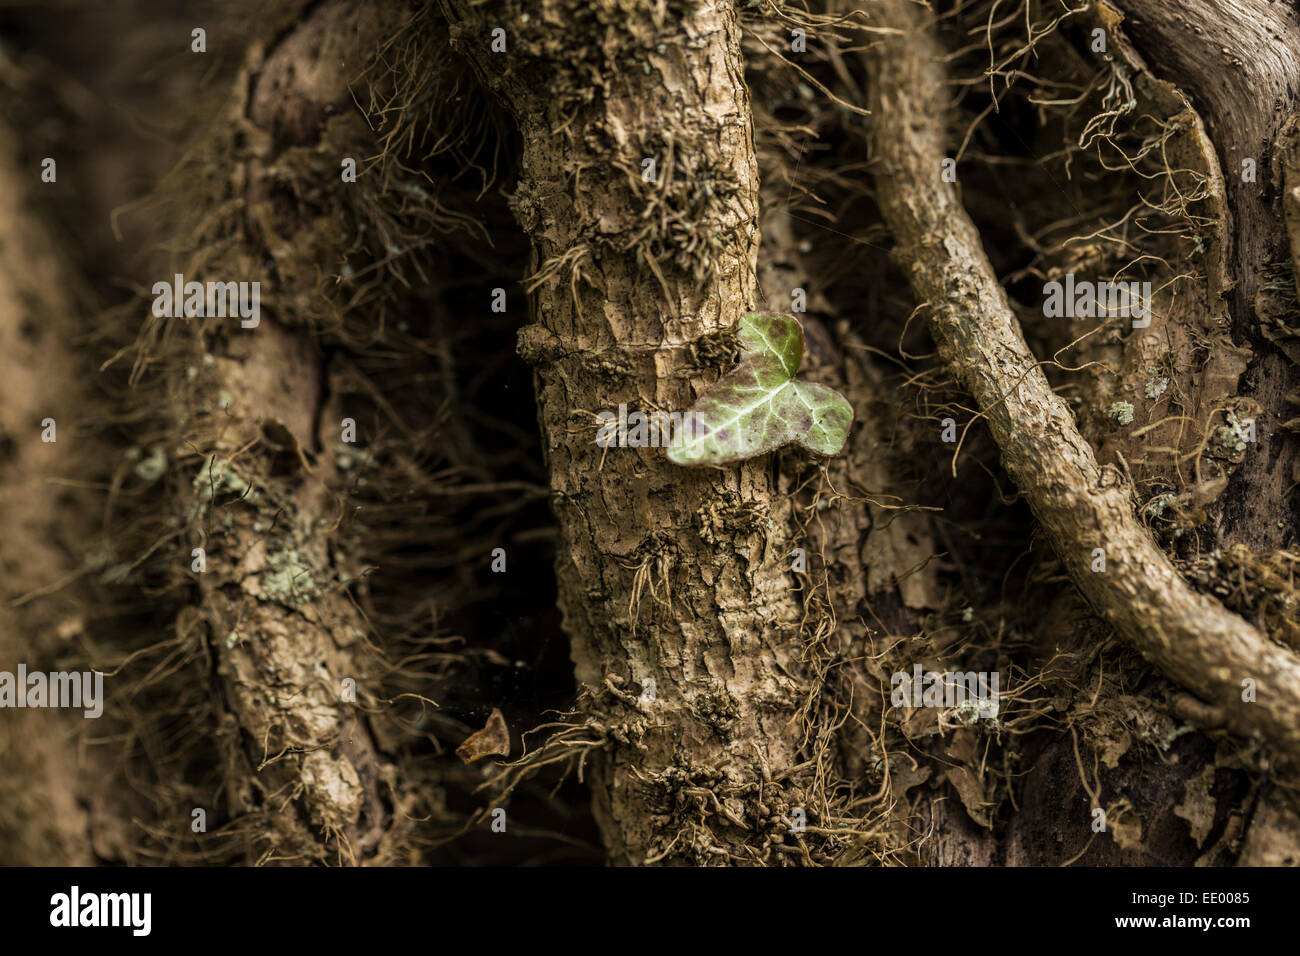 Ivy growing on a deciduous tree. Stock Photo